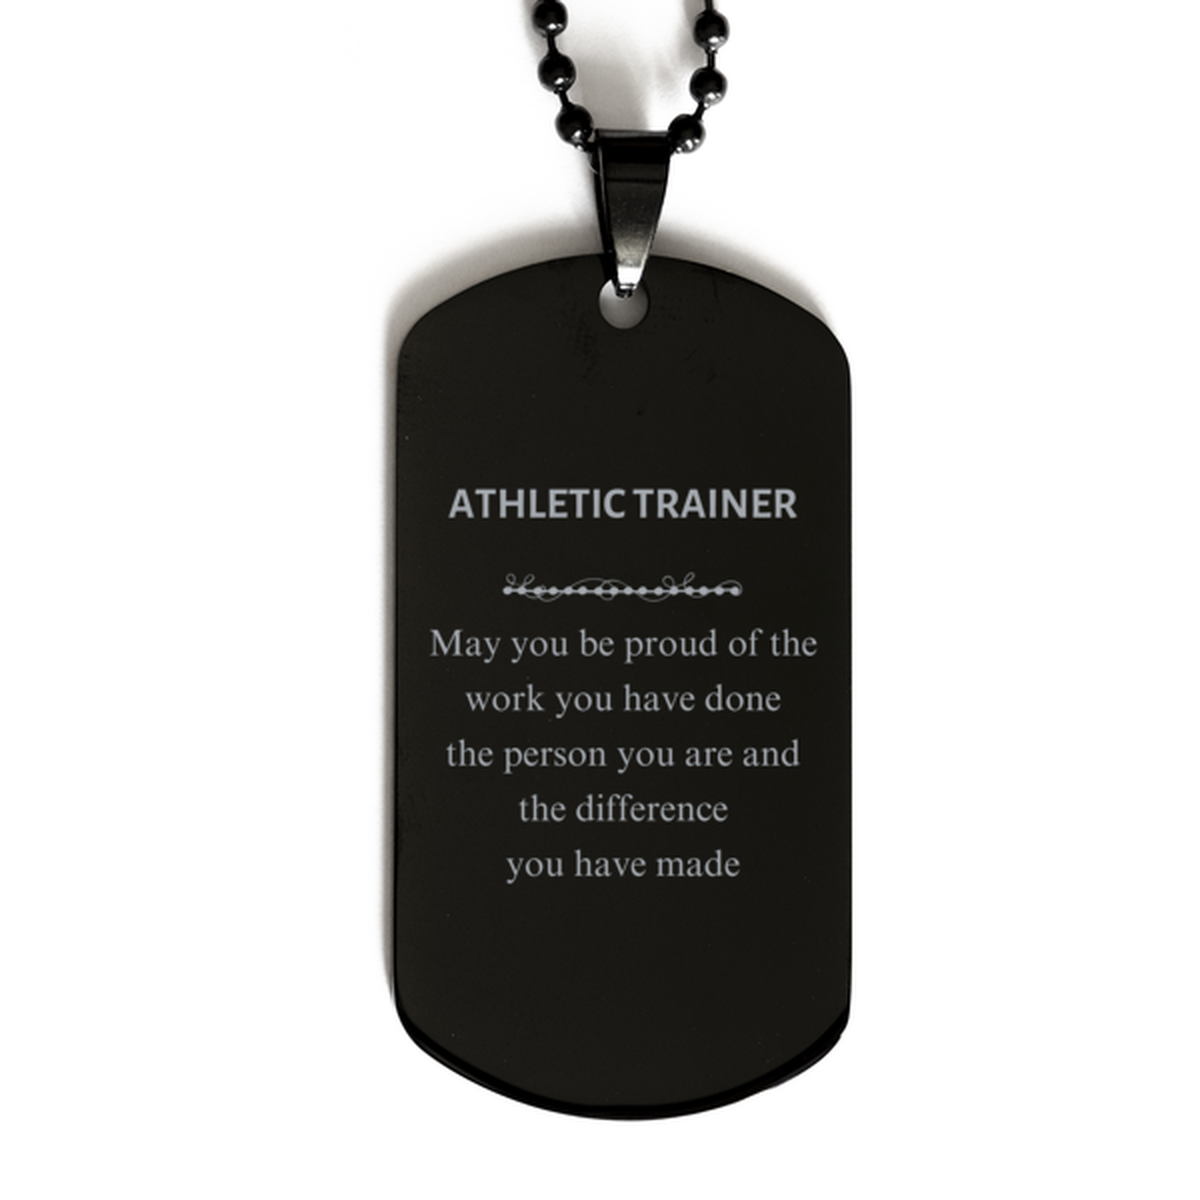 Athletic Trainer May you be proud of the work you have done, Retirement Athletic Trainer Black Dog Tag for Colleague Appreciation Gifts Amazing for Athletic Trainer